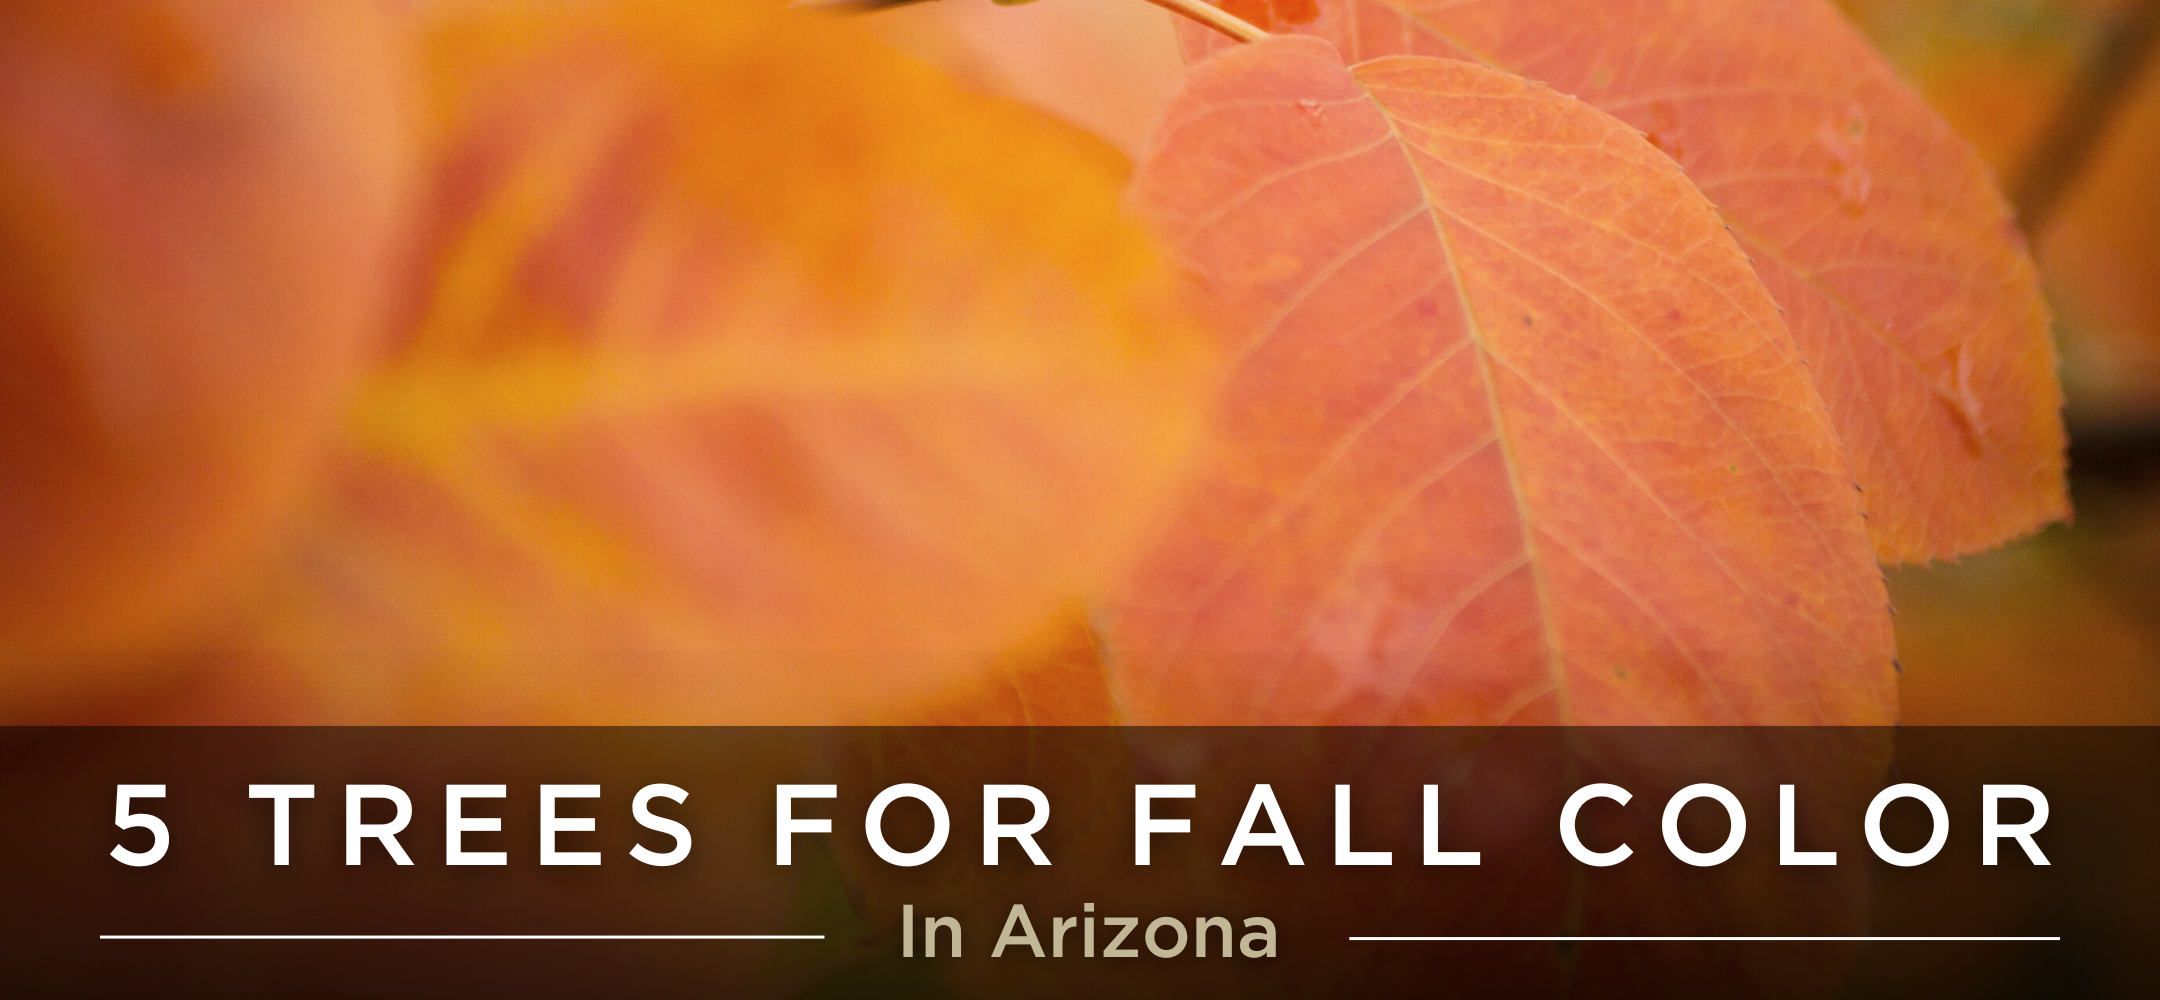 5 trees for fall colors header